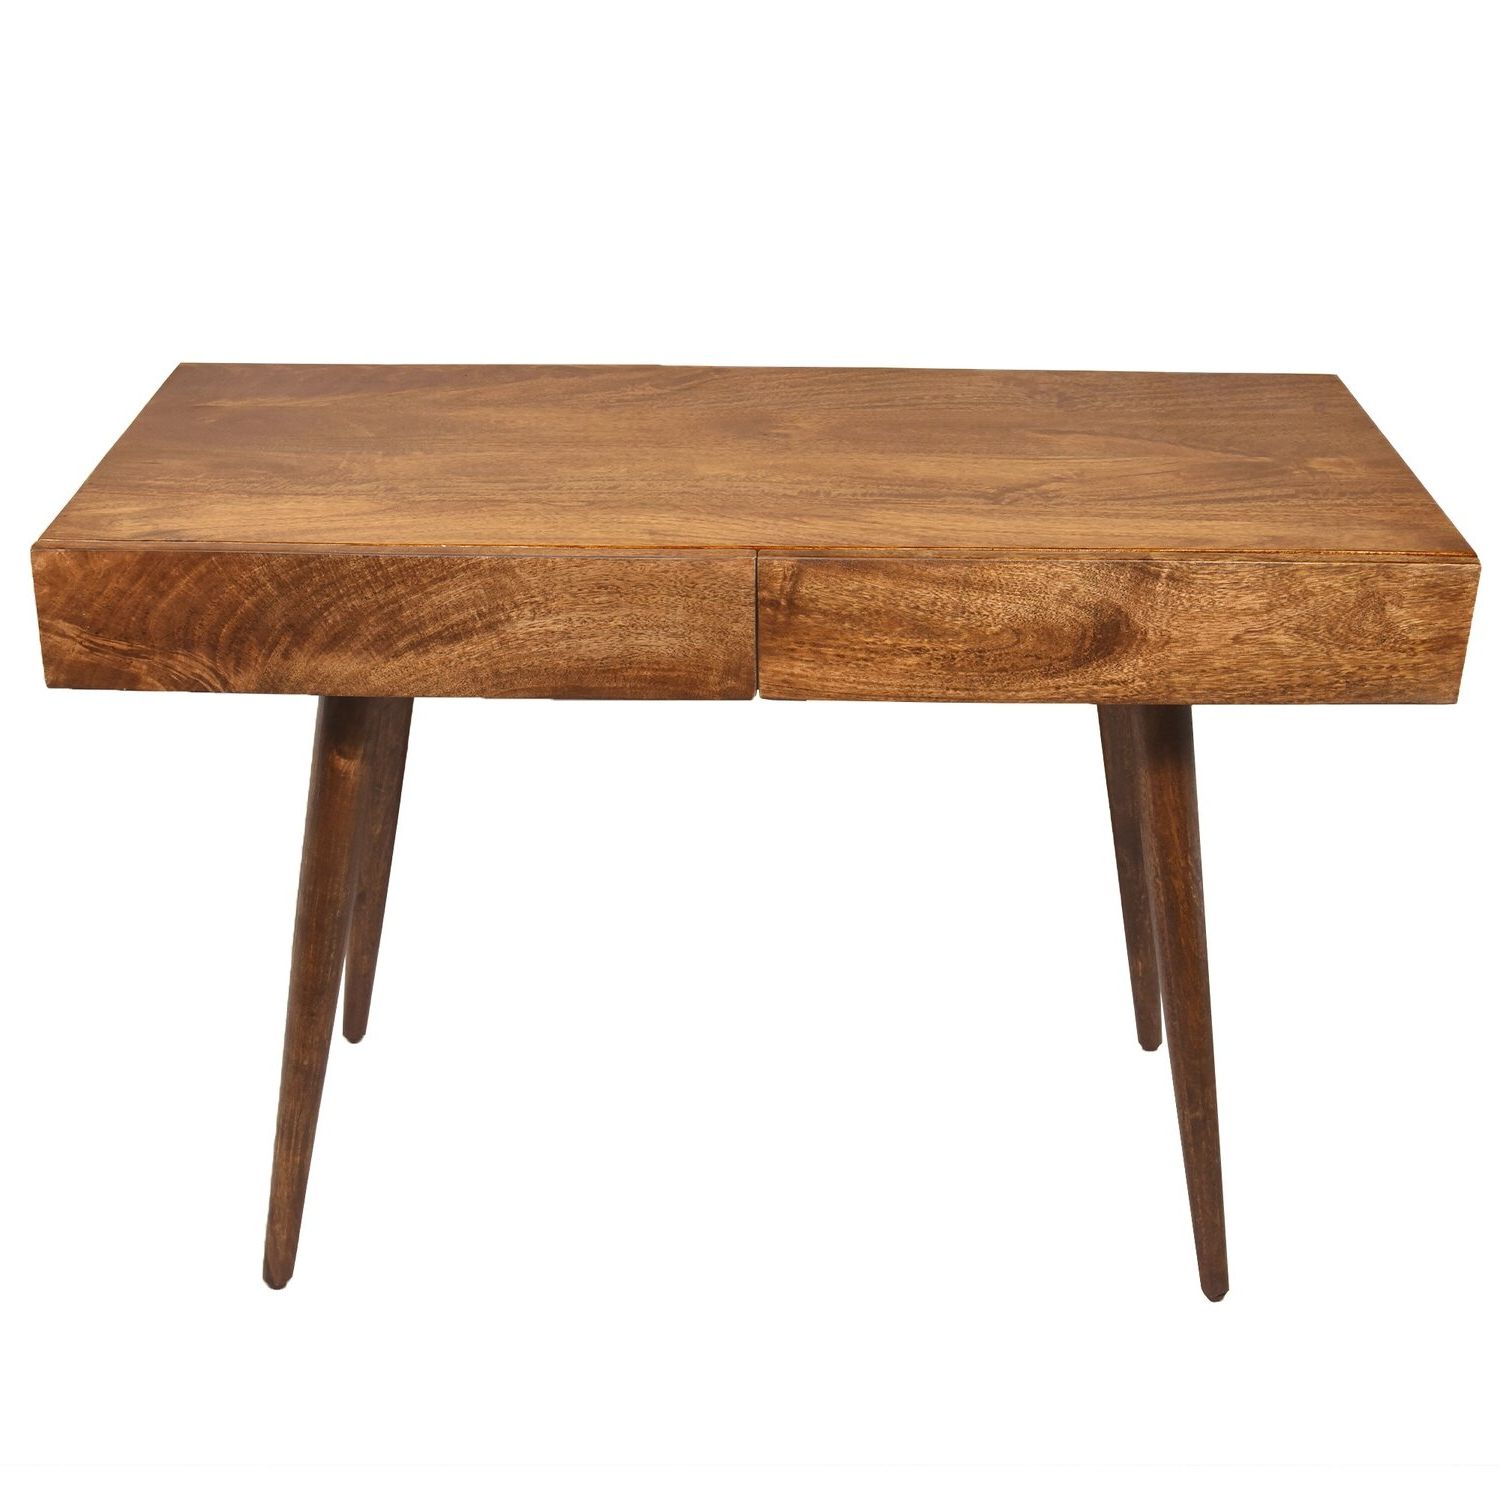 Mango Wood Writing Desk With Tapered Legs Regarding Best And Newest Mango Wood Writing Desks (View 2 of 15)